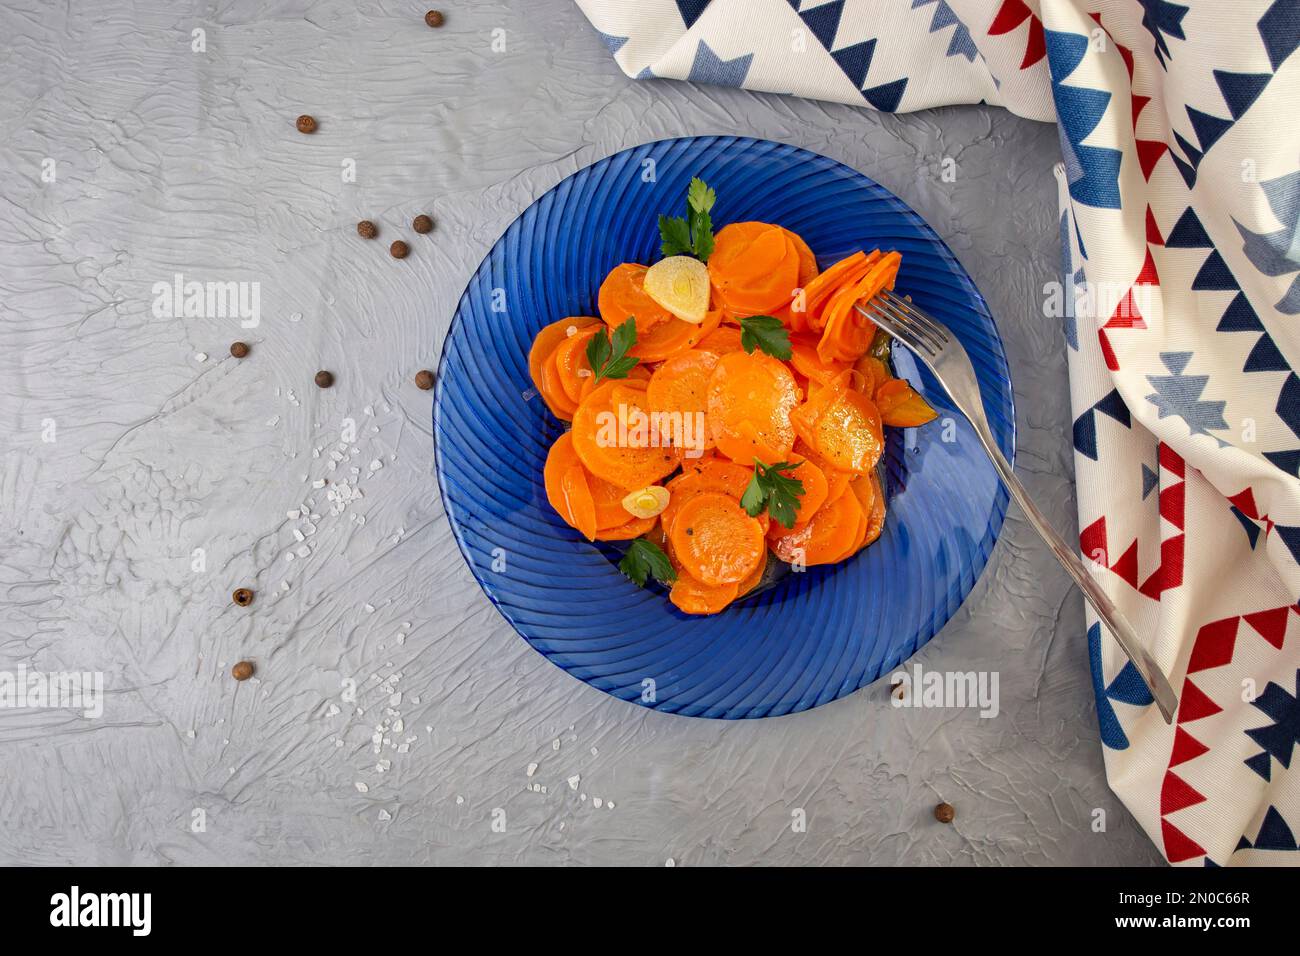 Sautéed carrots with garlic and parsley on a blue glass plate, on cement table top, with fabric napkin, flat lay Stock Photo